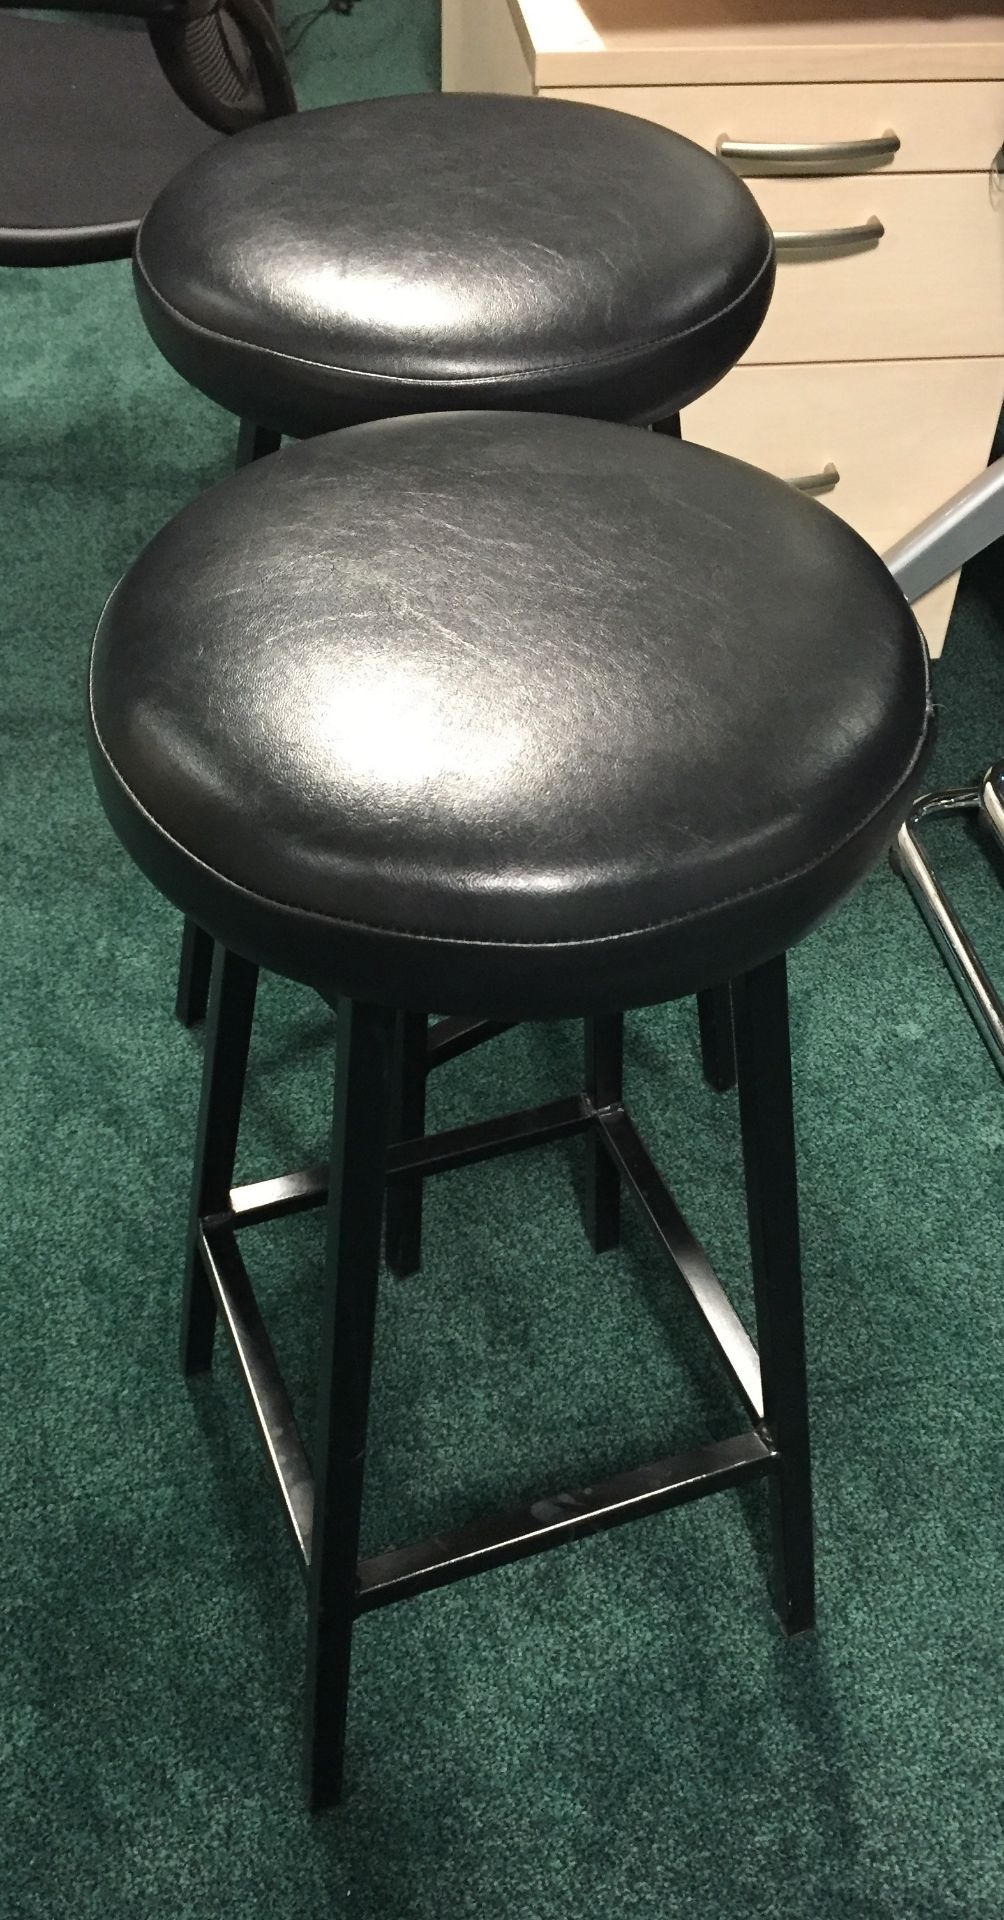 2 x Contemporary Black Bar Stools With Leather Cushioned Seats - Excellent Condition - CL198 - - Image 2 of 3